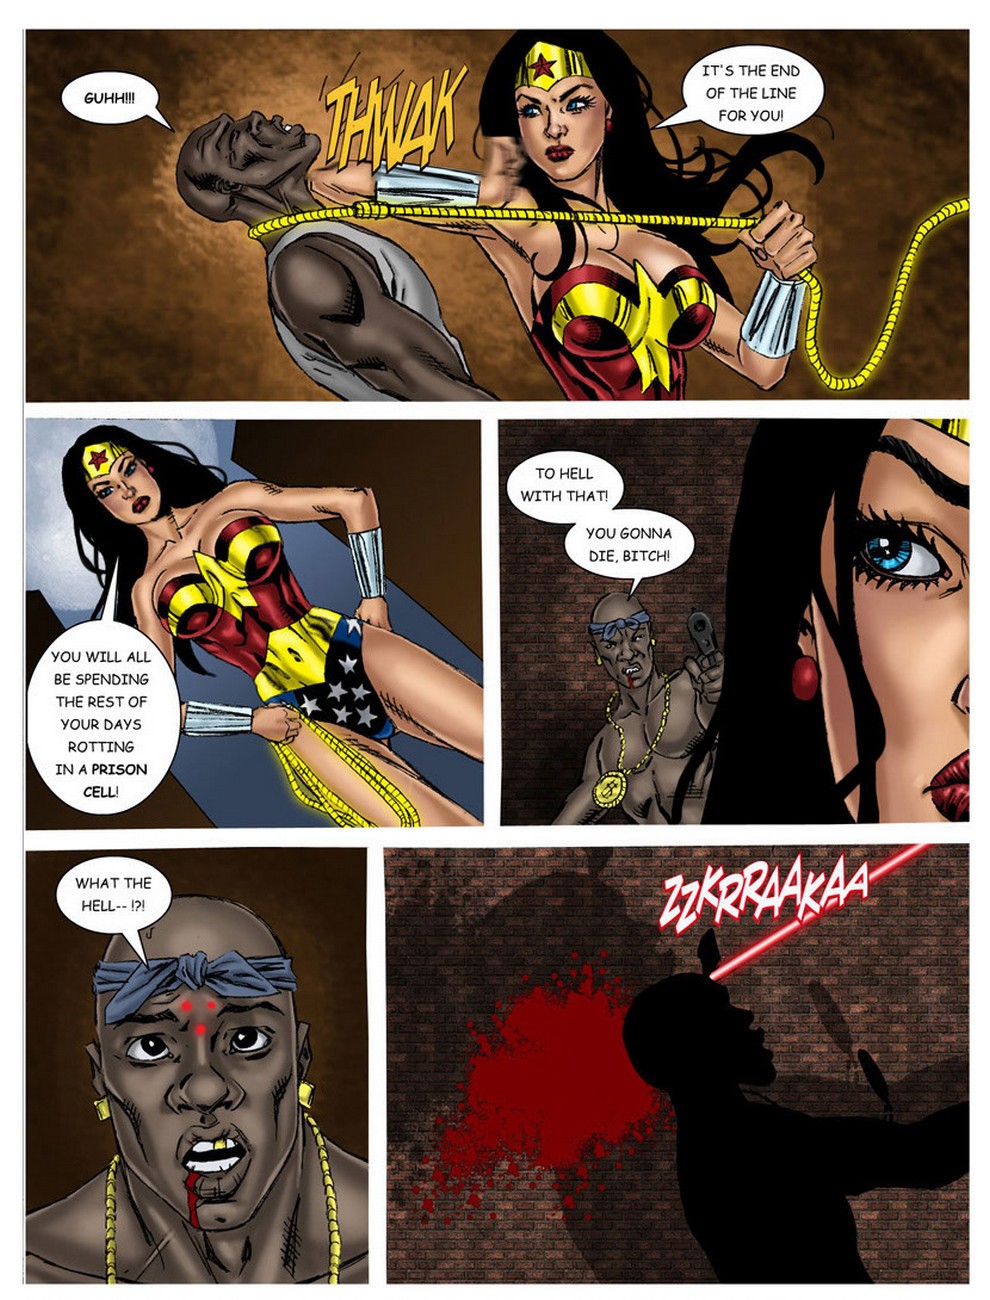 Wonder Woman In The Clutches Of The Predator 1 Hentai Online Porn Manga And Doujinshi